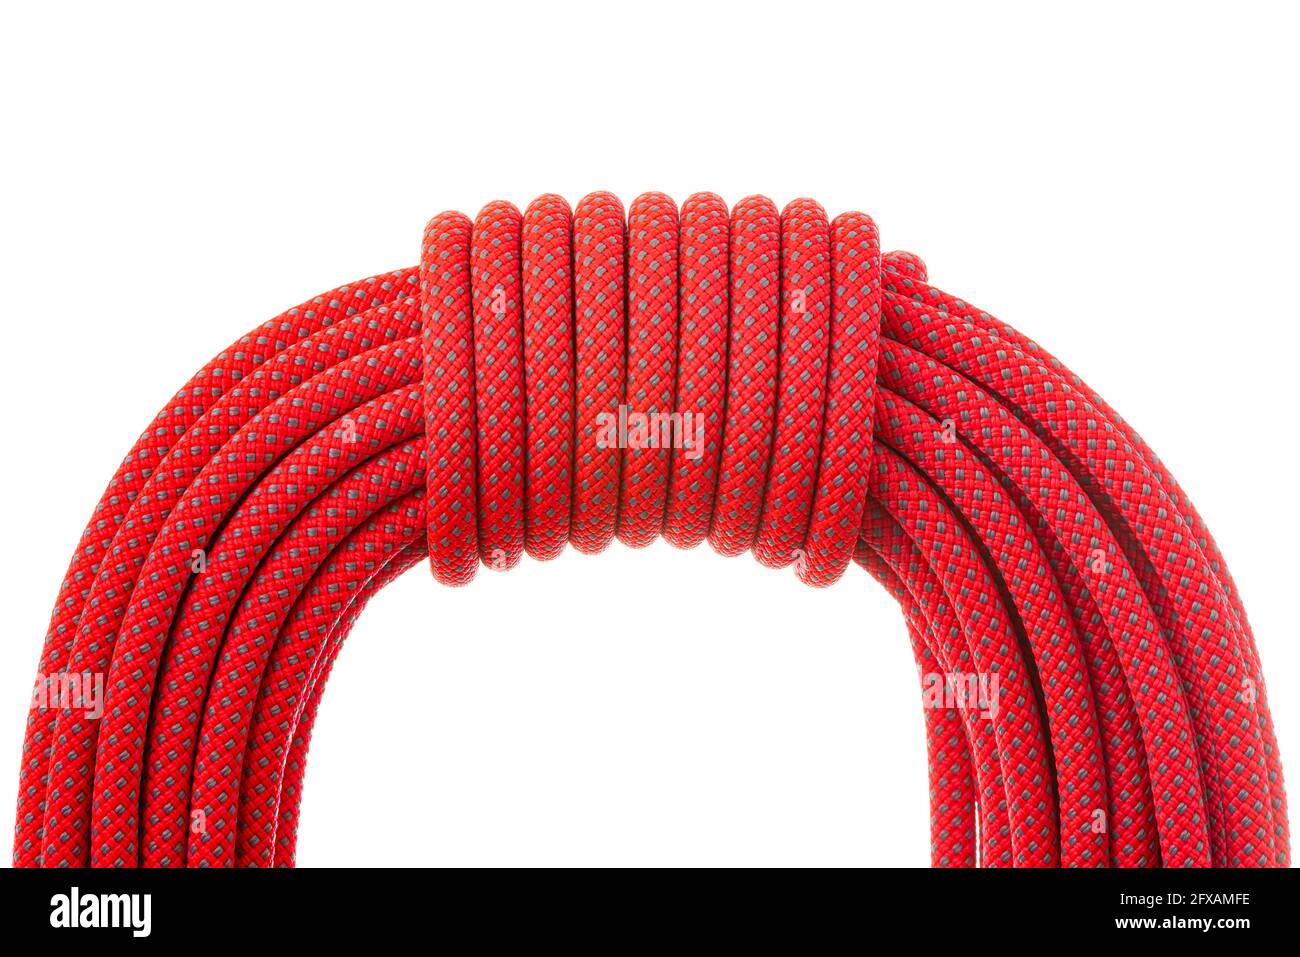 Red climbing rope against white background Stock Photo